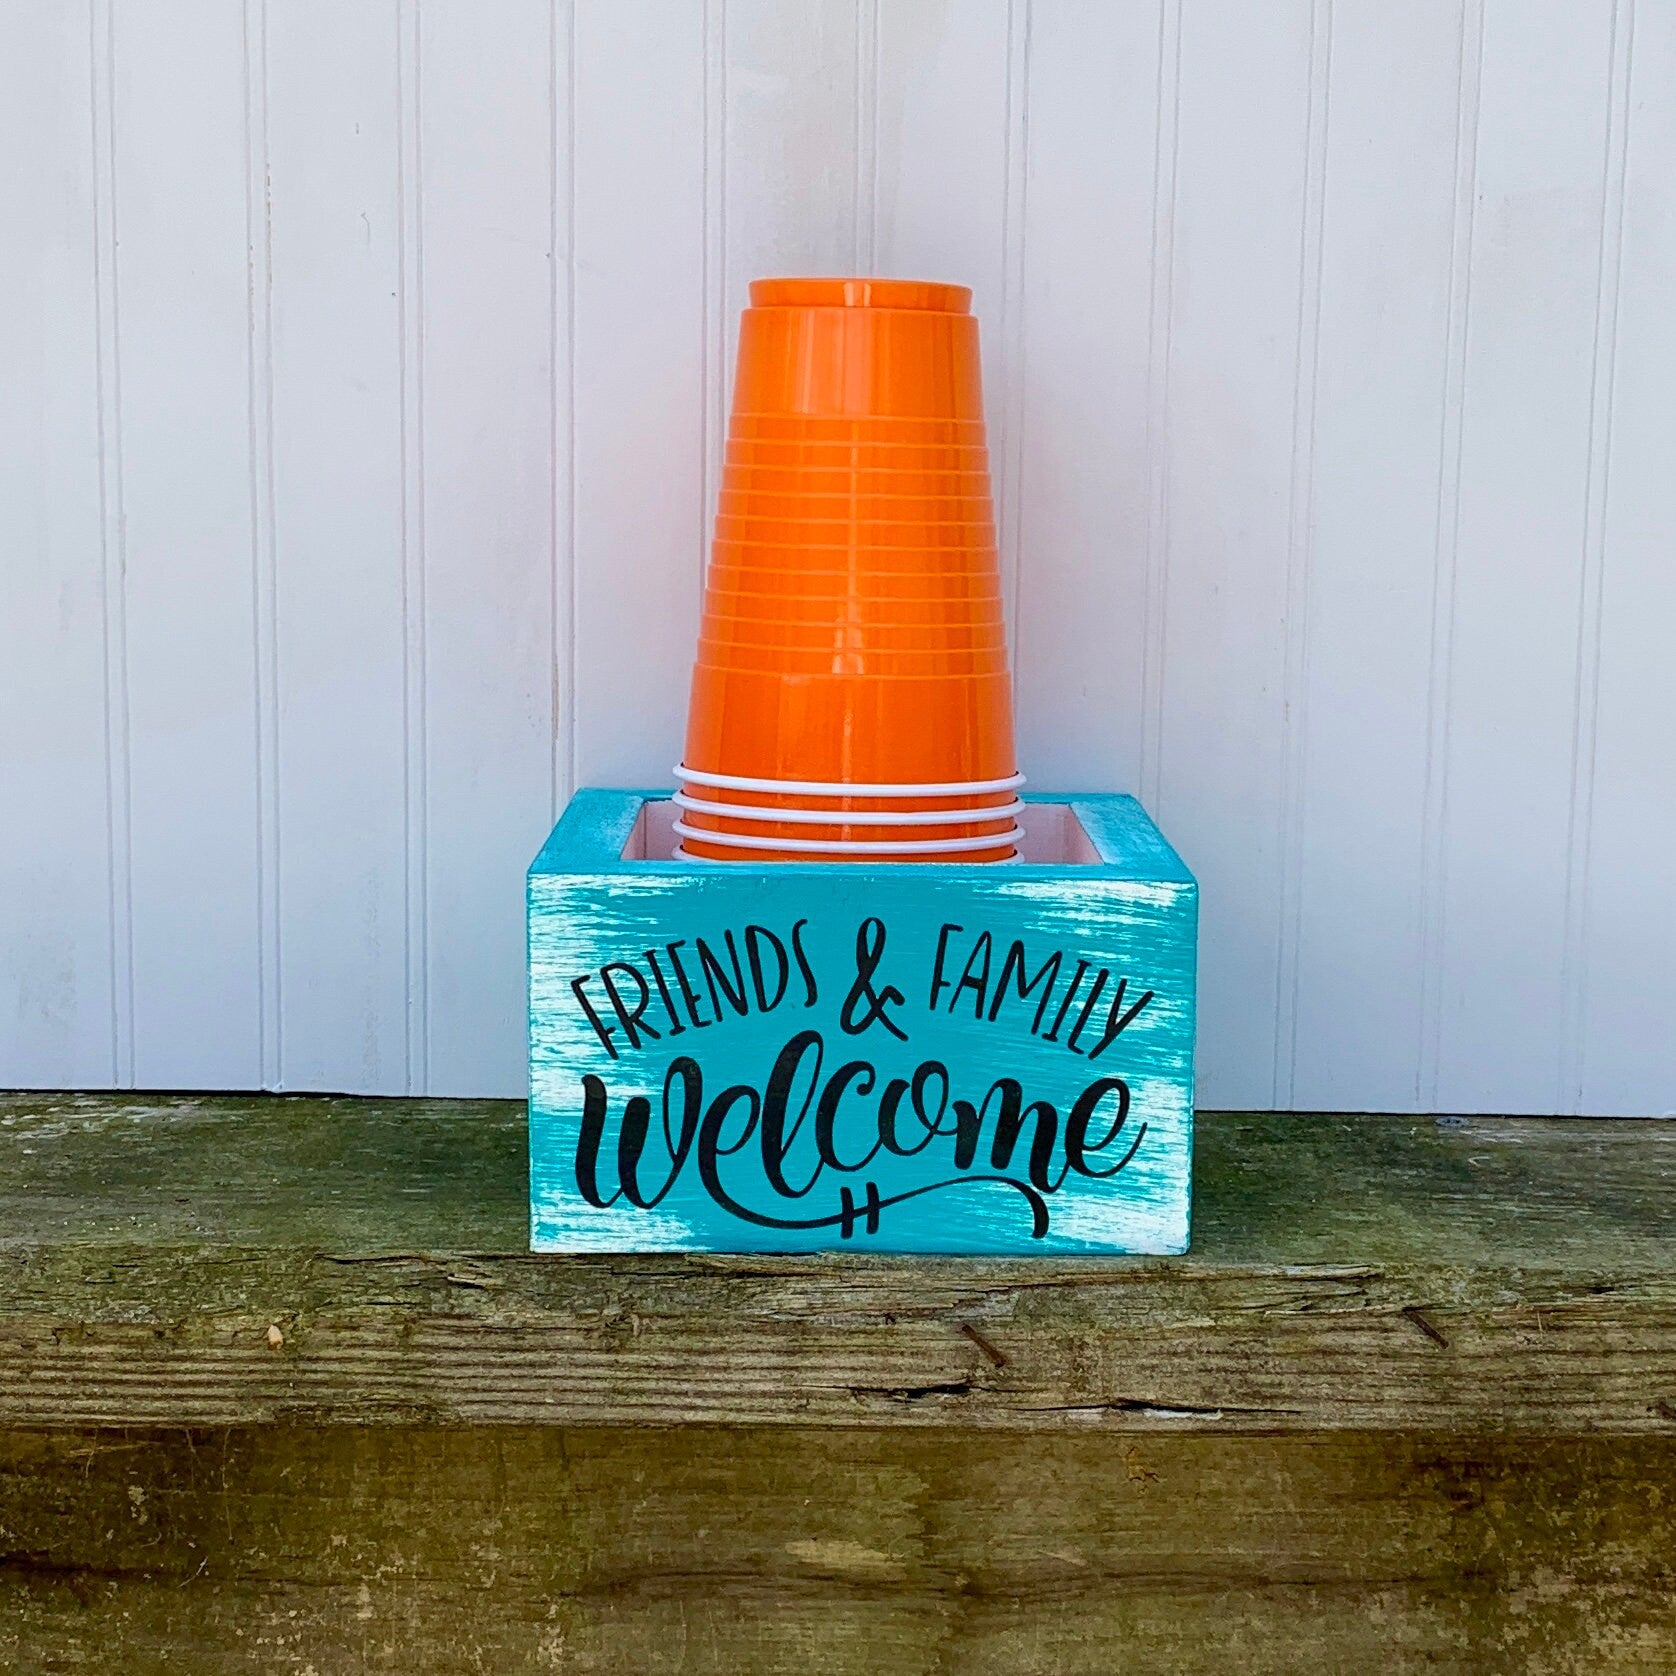 Solo Cup Holder for Parties, Weddings, Picnics, Holiday and Family  Gatherings, Beer Pong, Sharpie included- Unique Design!